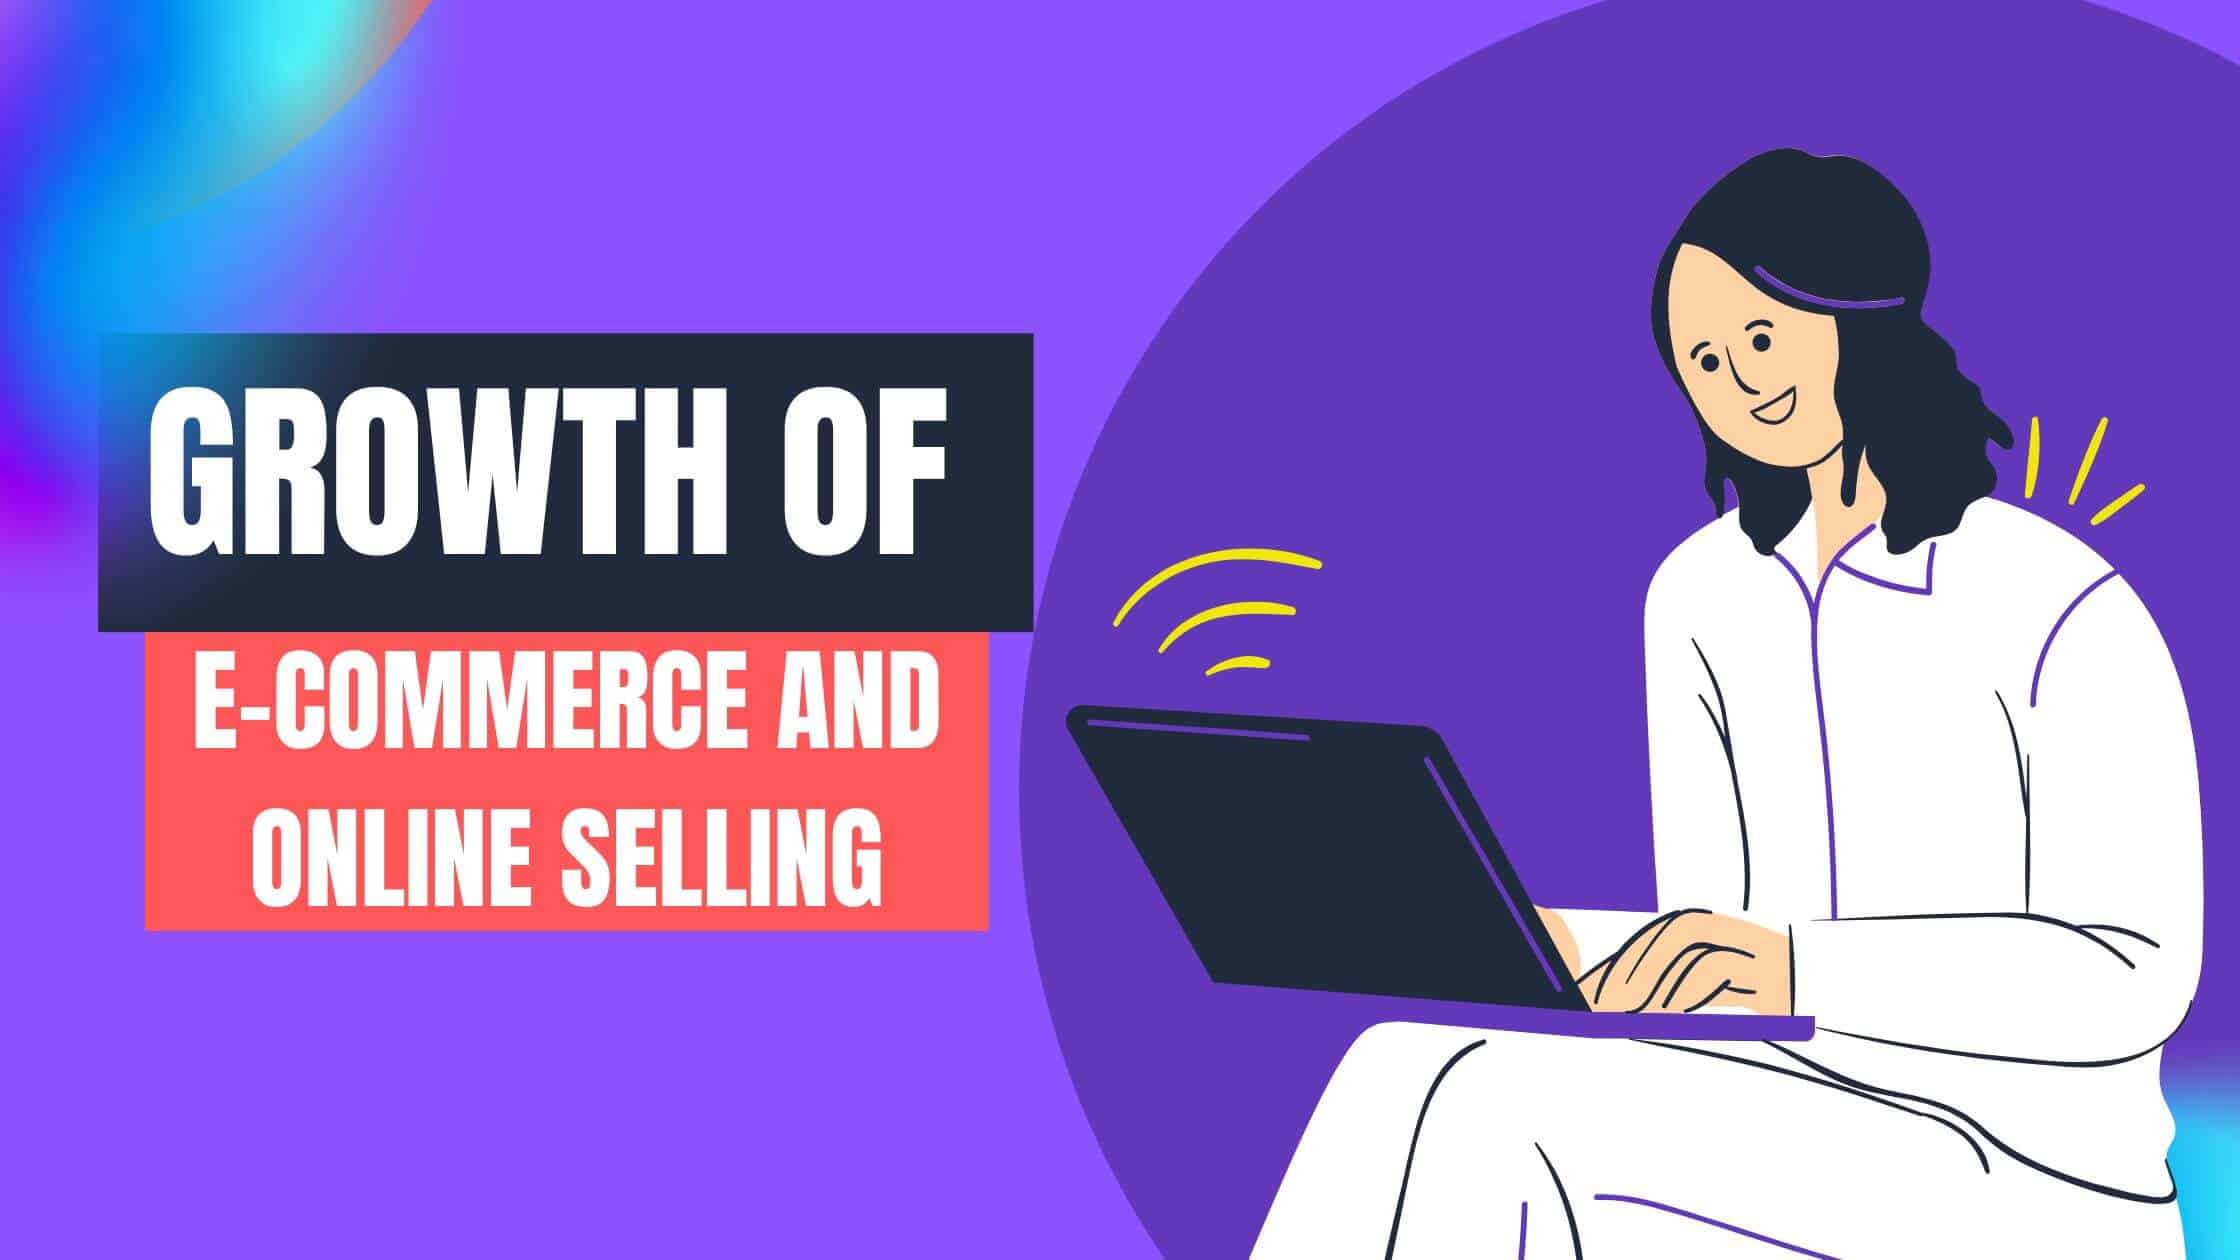 The Growth Of E-Commerce And Online Selling